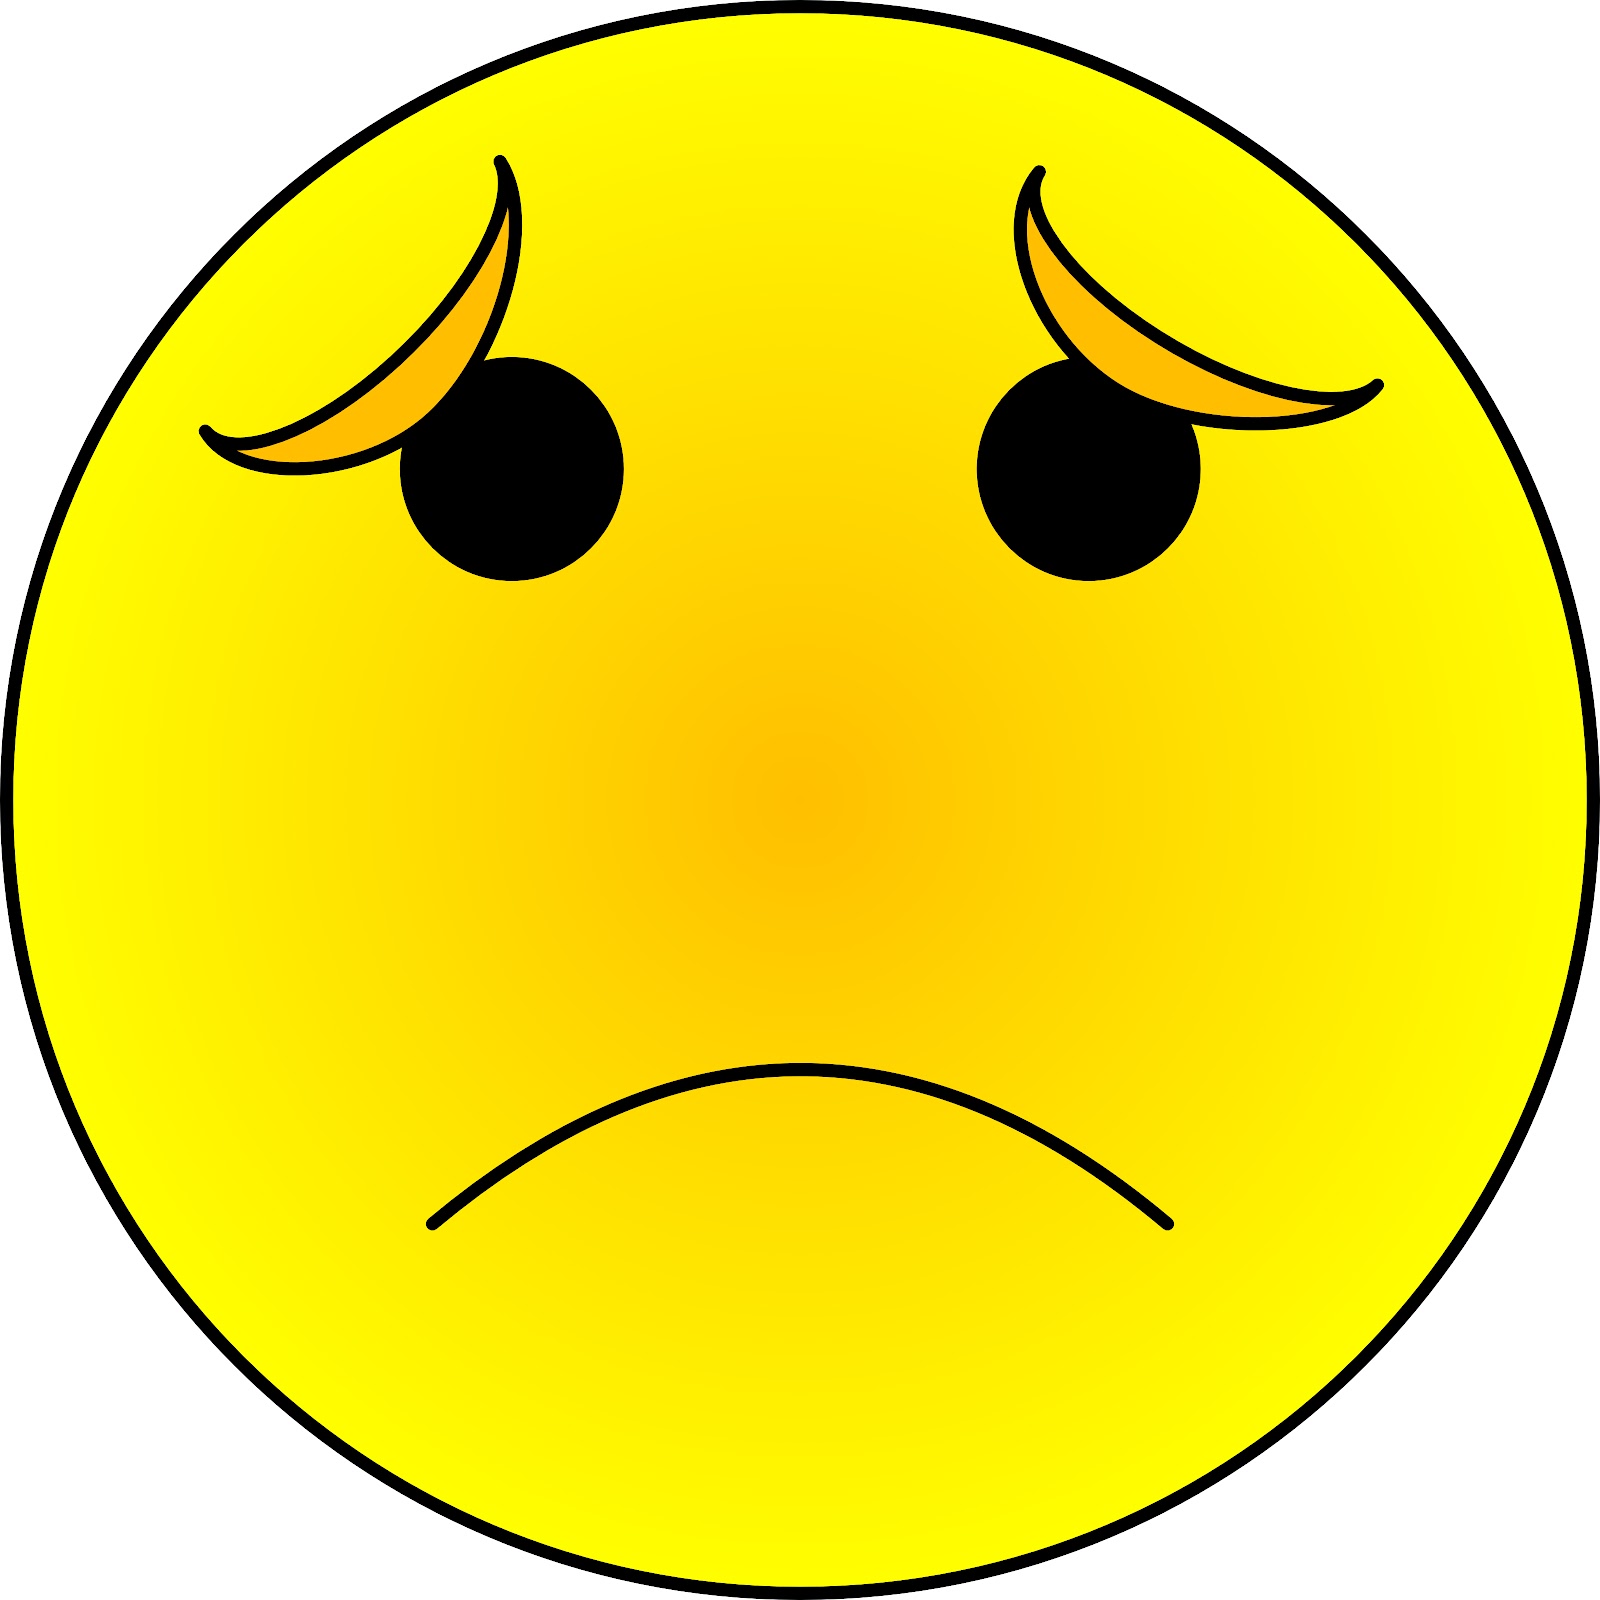 Sad Smiley Face Animation - ClipArt Best